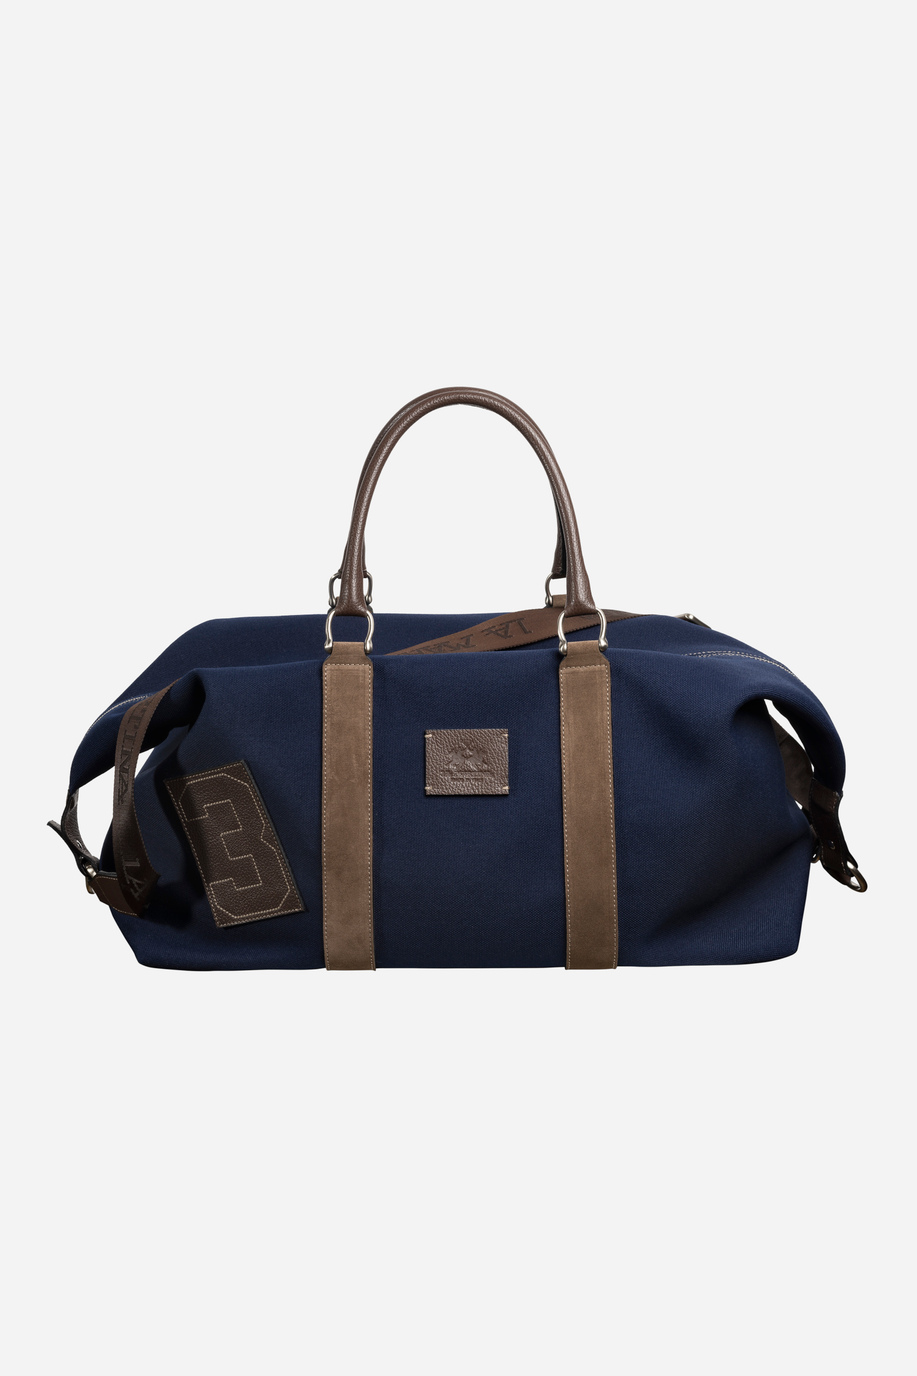 Cotton duffle bag with leather inserts - Bags | La Martina - Official Online Shop